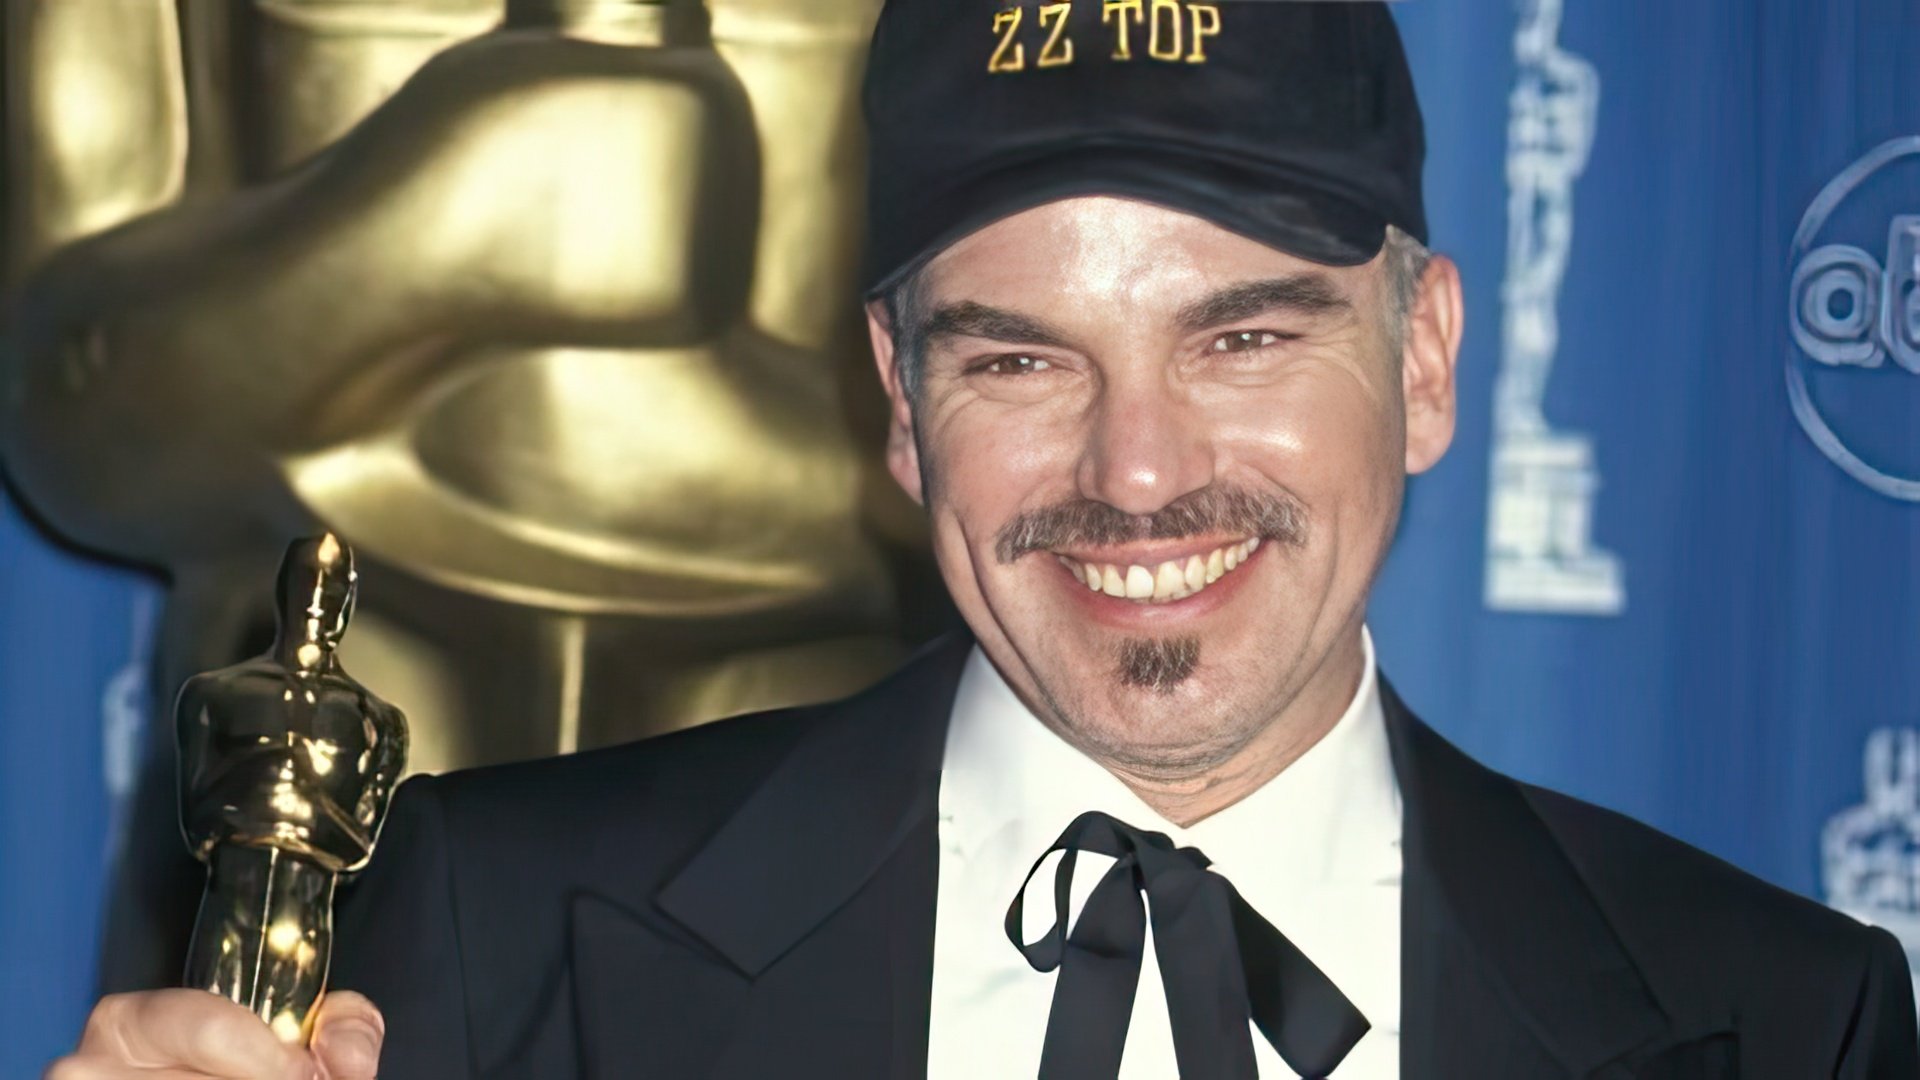 In 1997, Billy Bob Thornton Received the Oscar for Best Adapted Screenplay